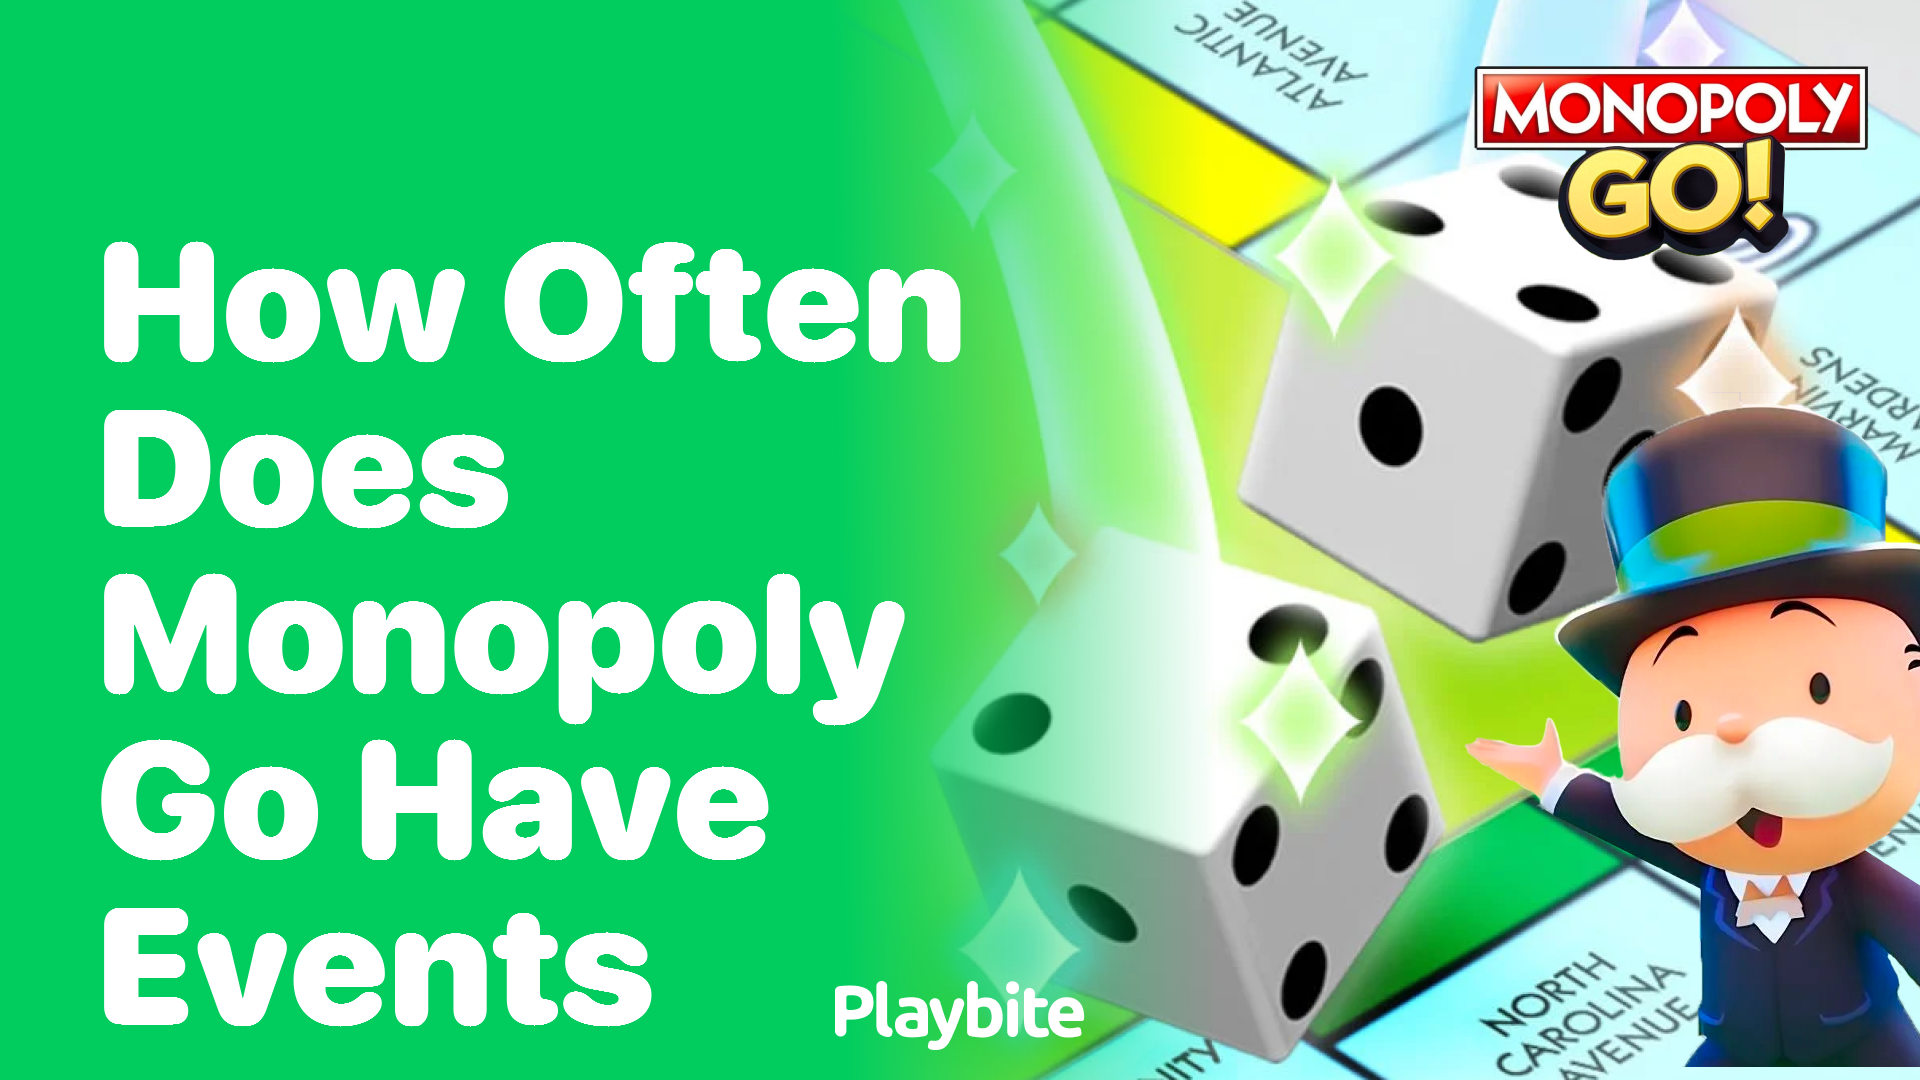 How Often Does Monopoly Go Have Events?